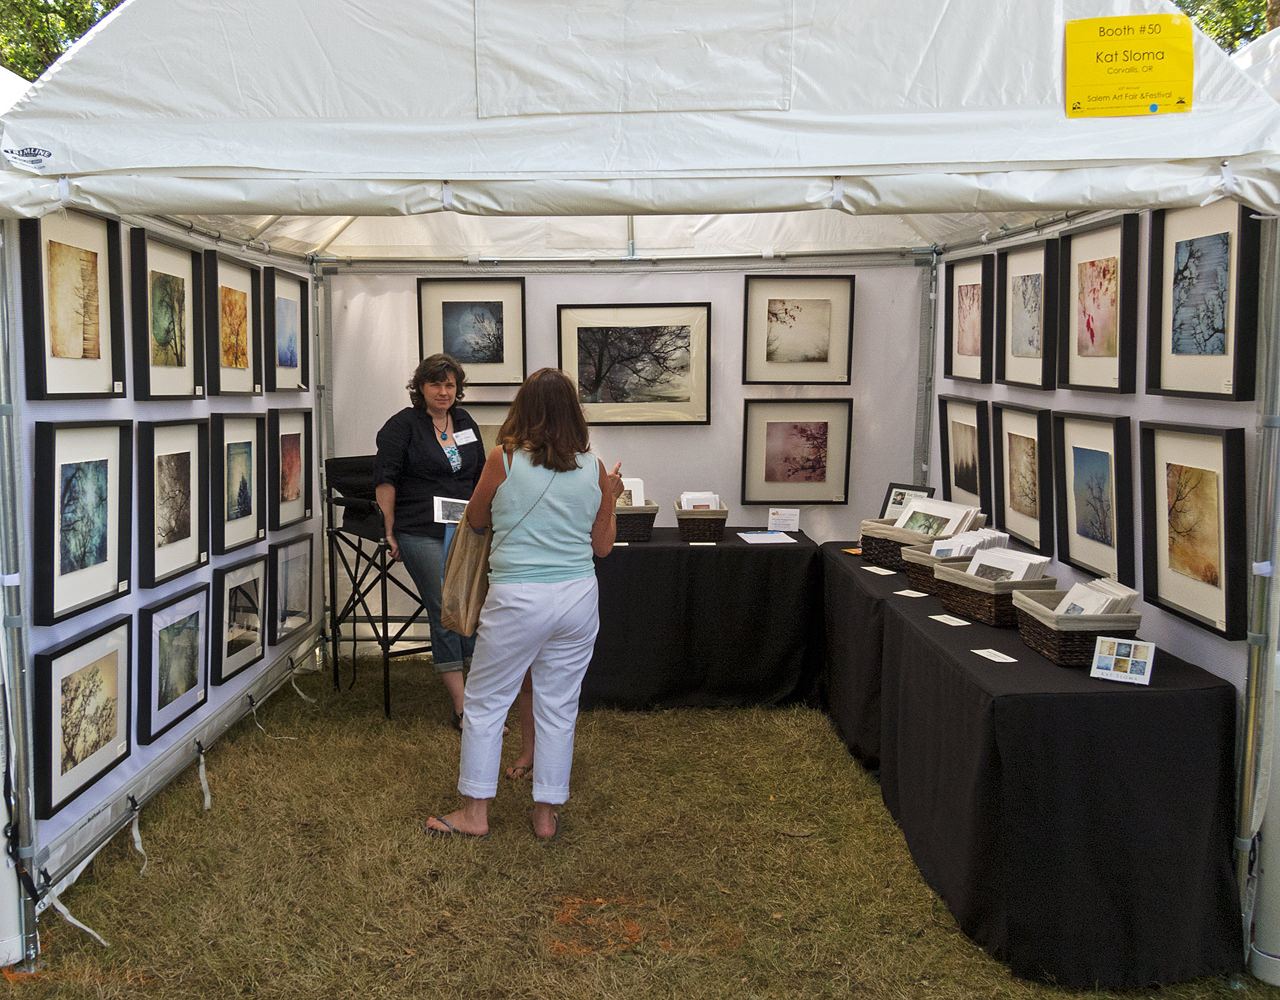 11 Tips To Make The Most Of Your First Or 100th Art Show